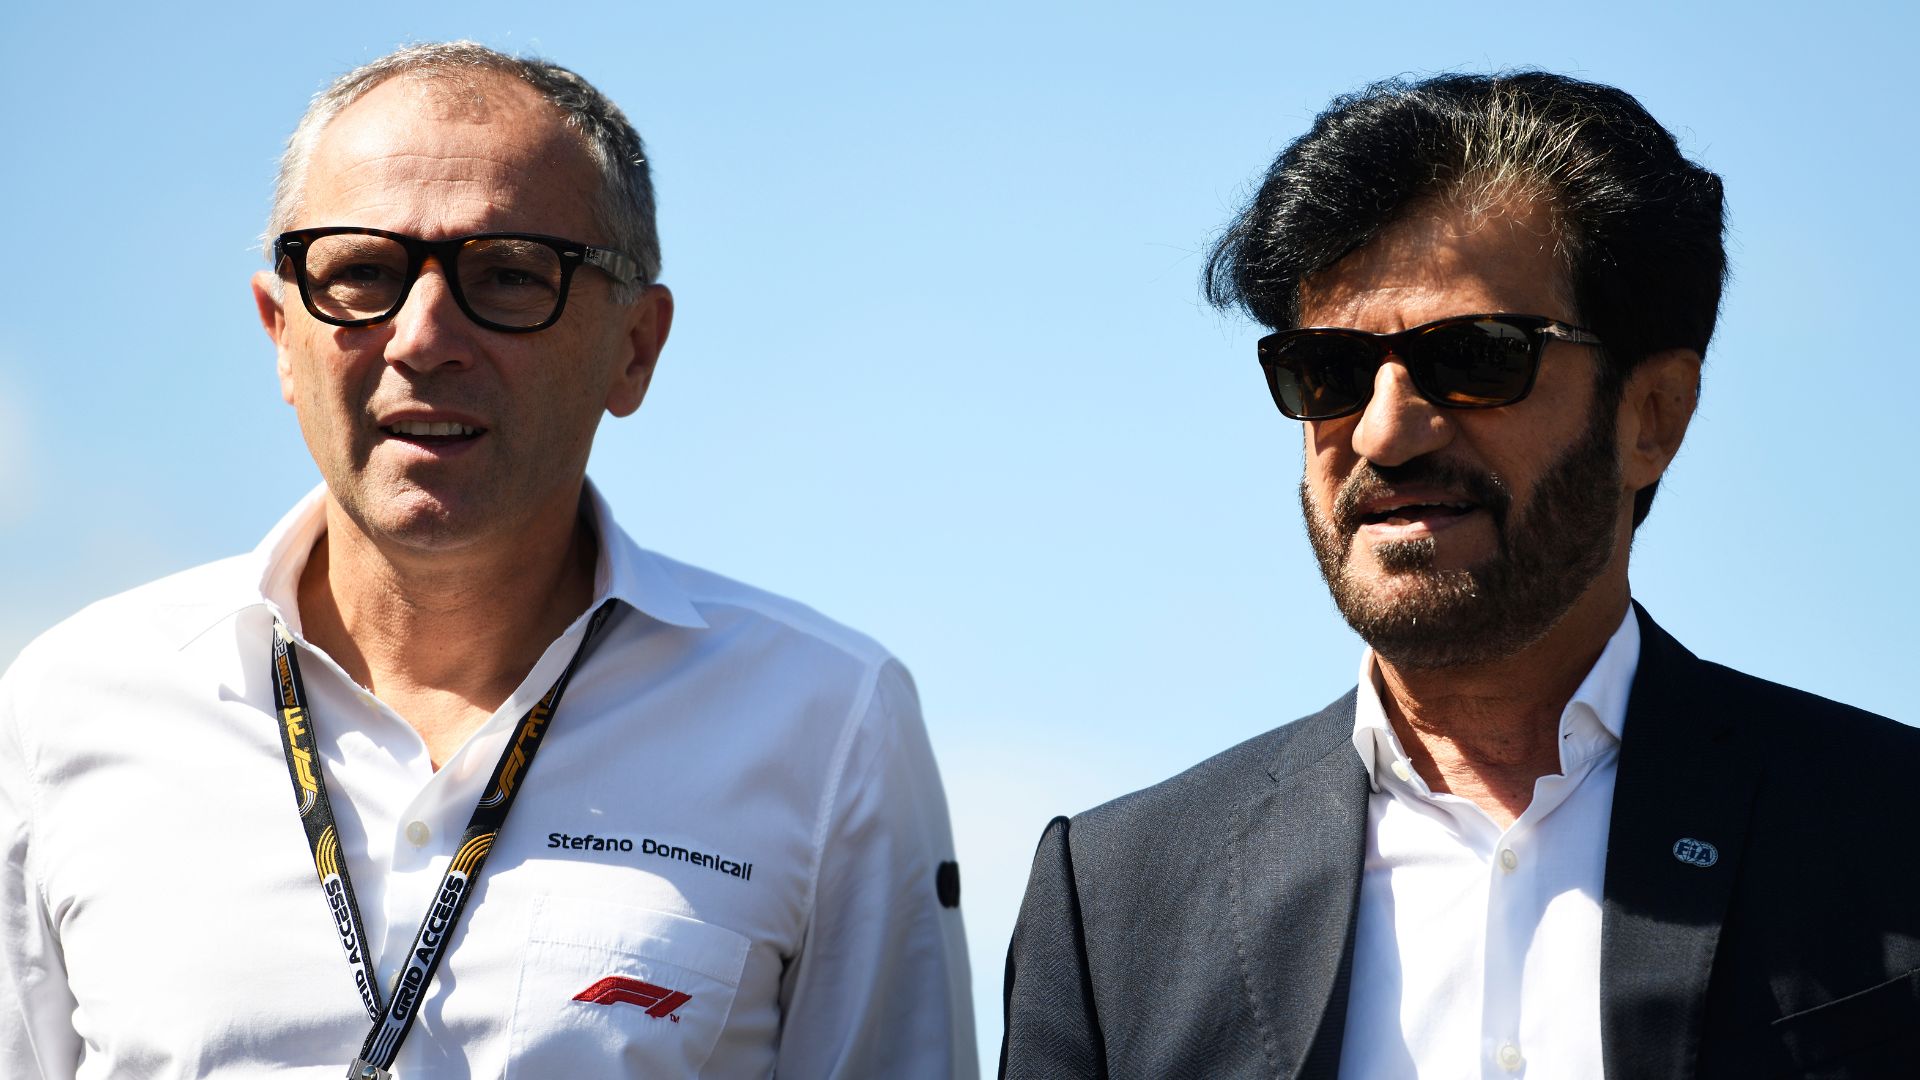 Stefano Domenicali e Mohammed Ben Sulayem juntos (Crédito: Getty Images)